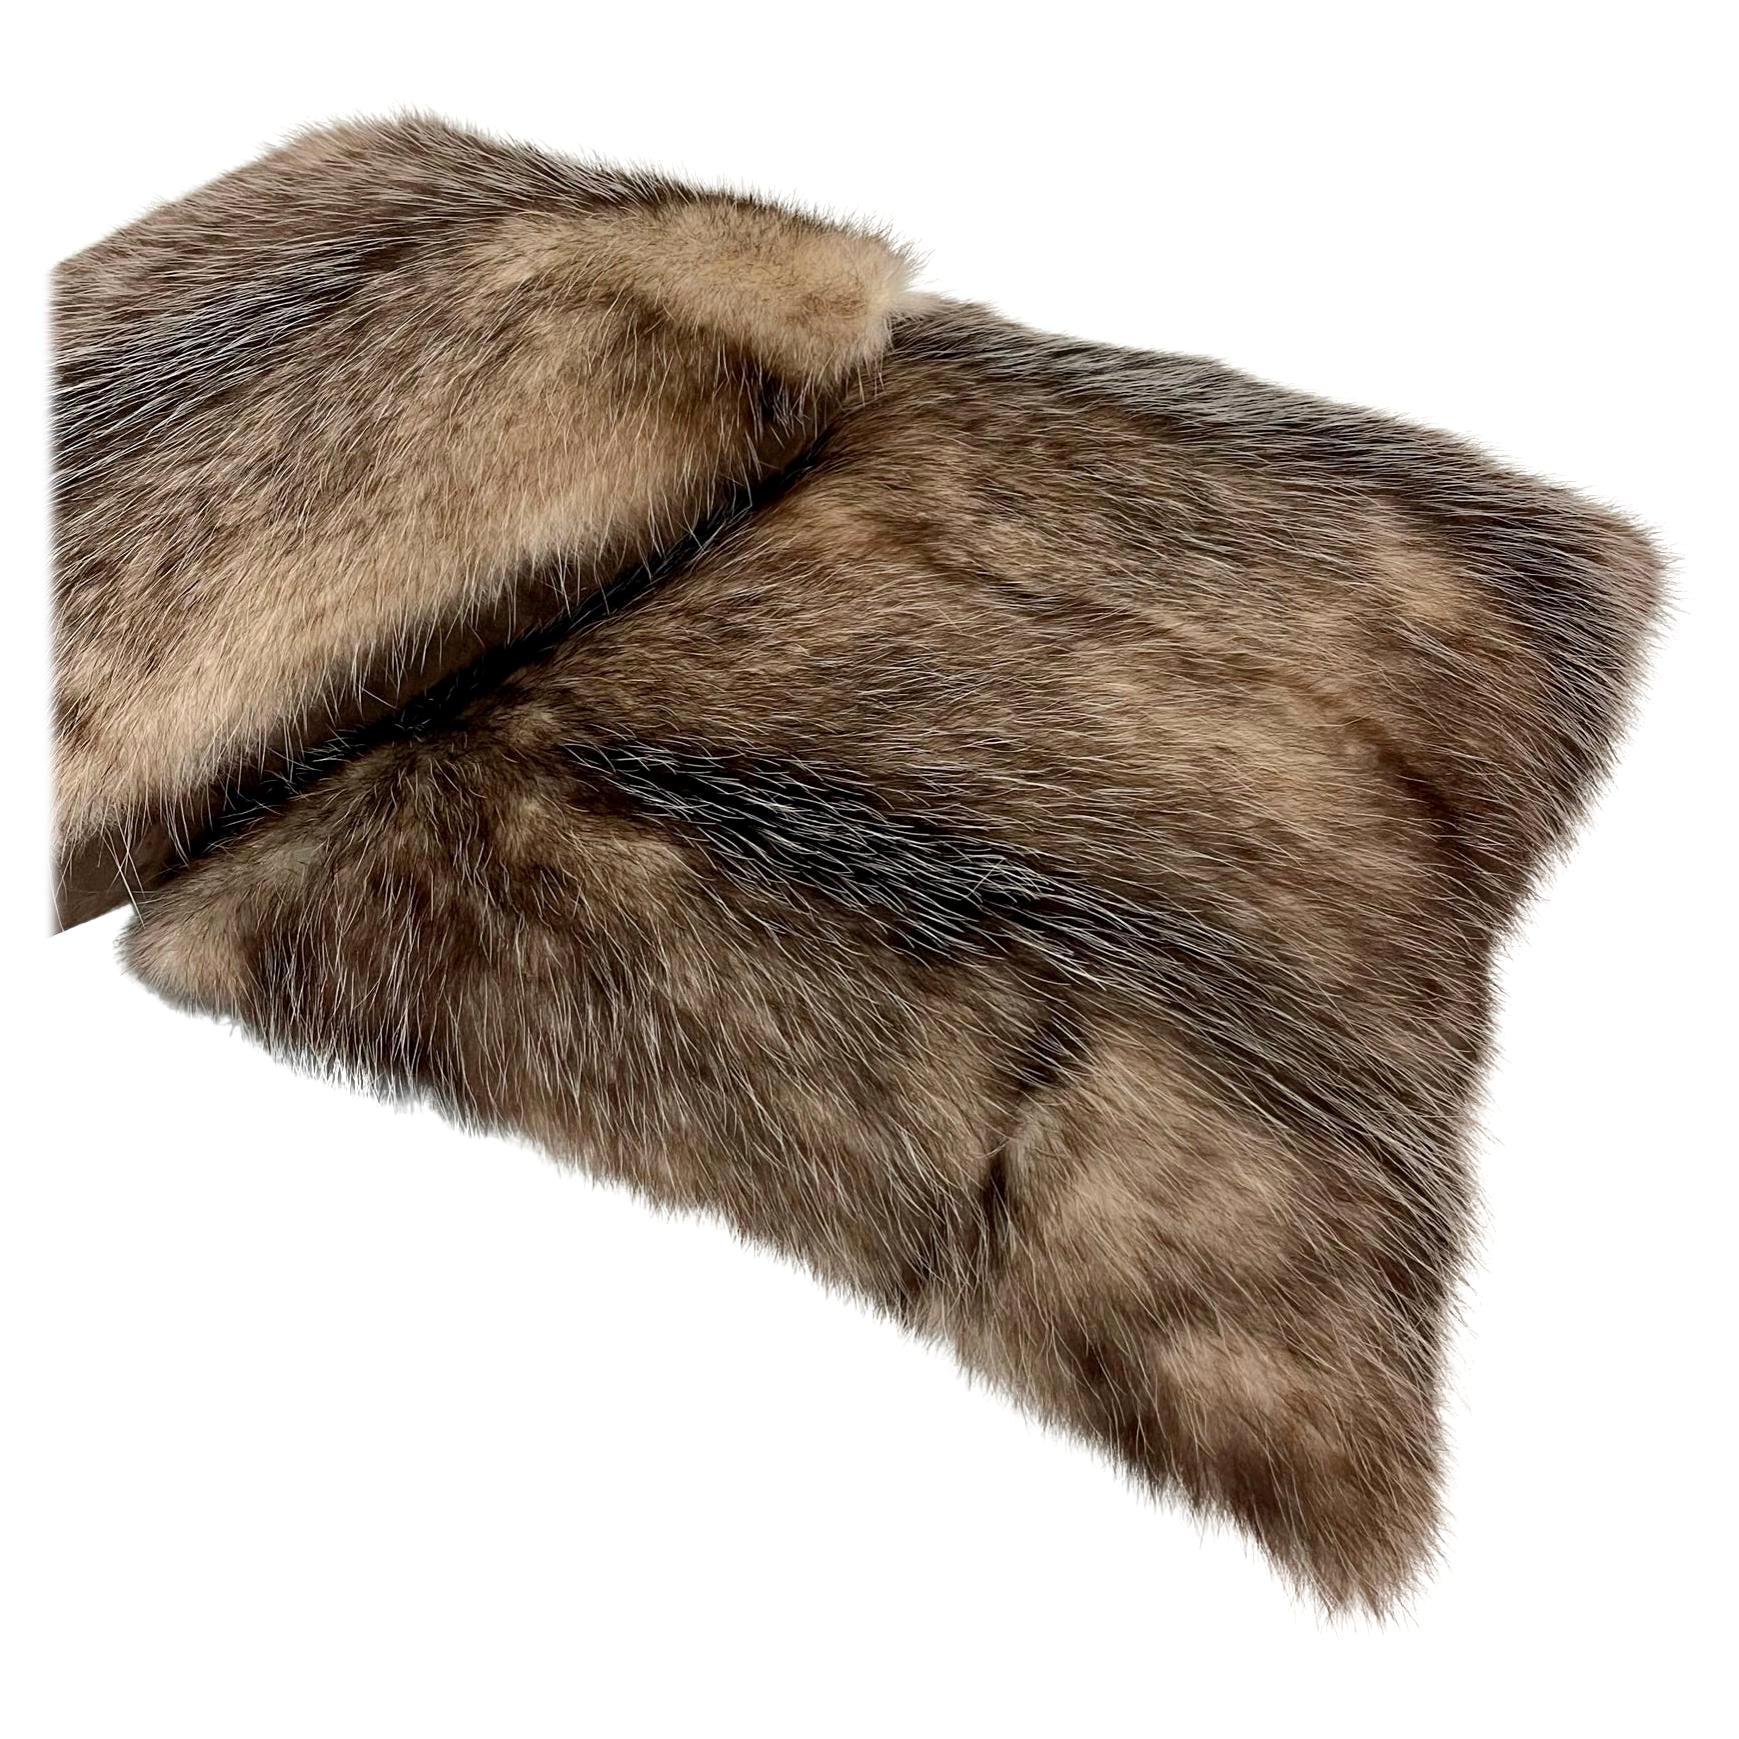 Set of Two Fur Cushion with Cotton / Down Feather Insert, Opossum For Sale